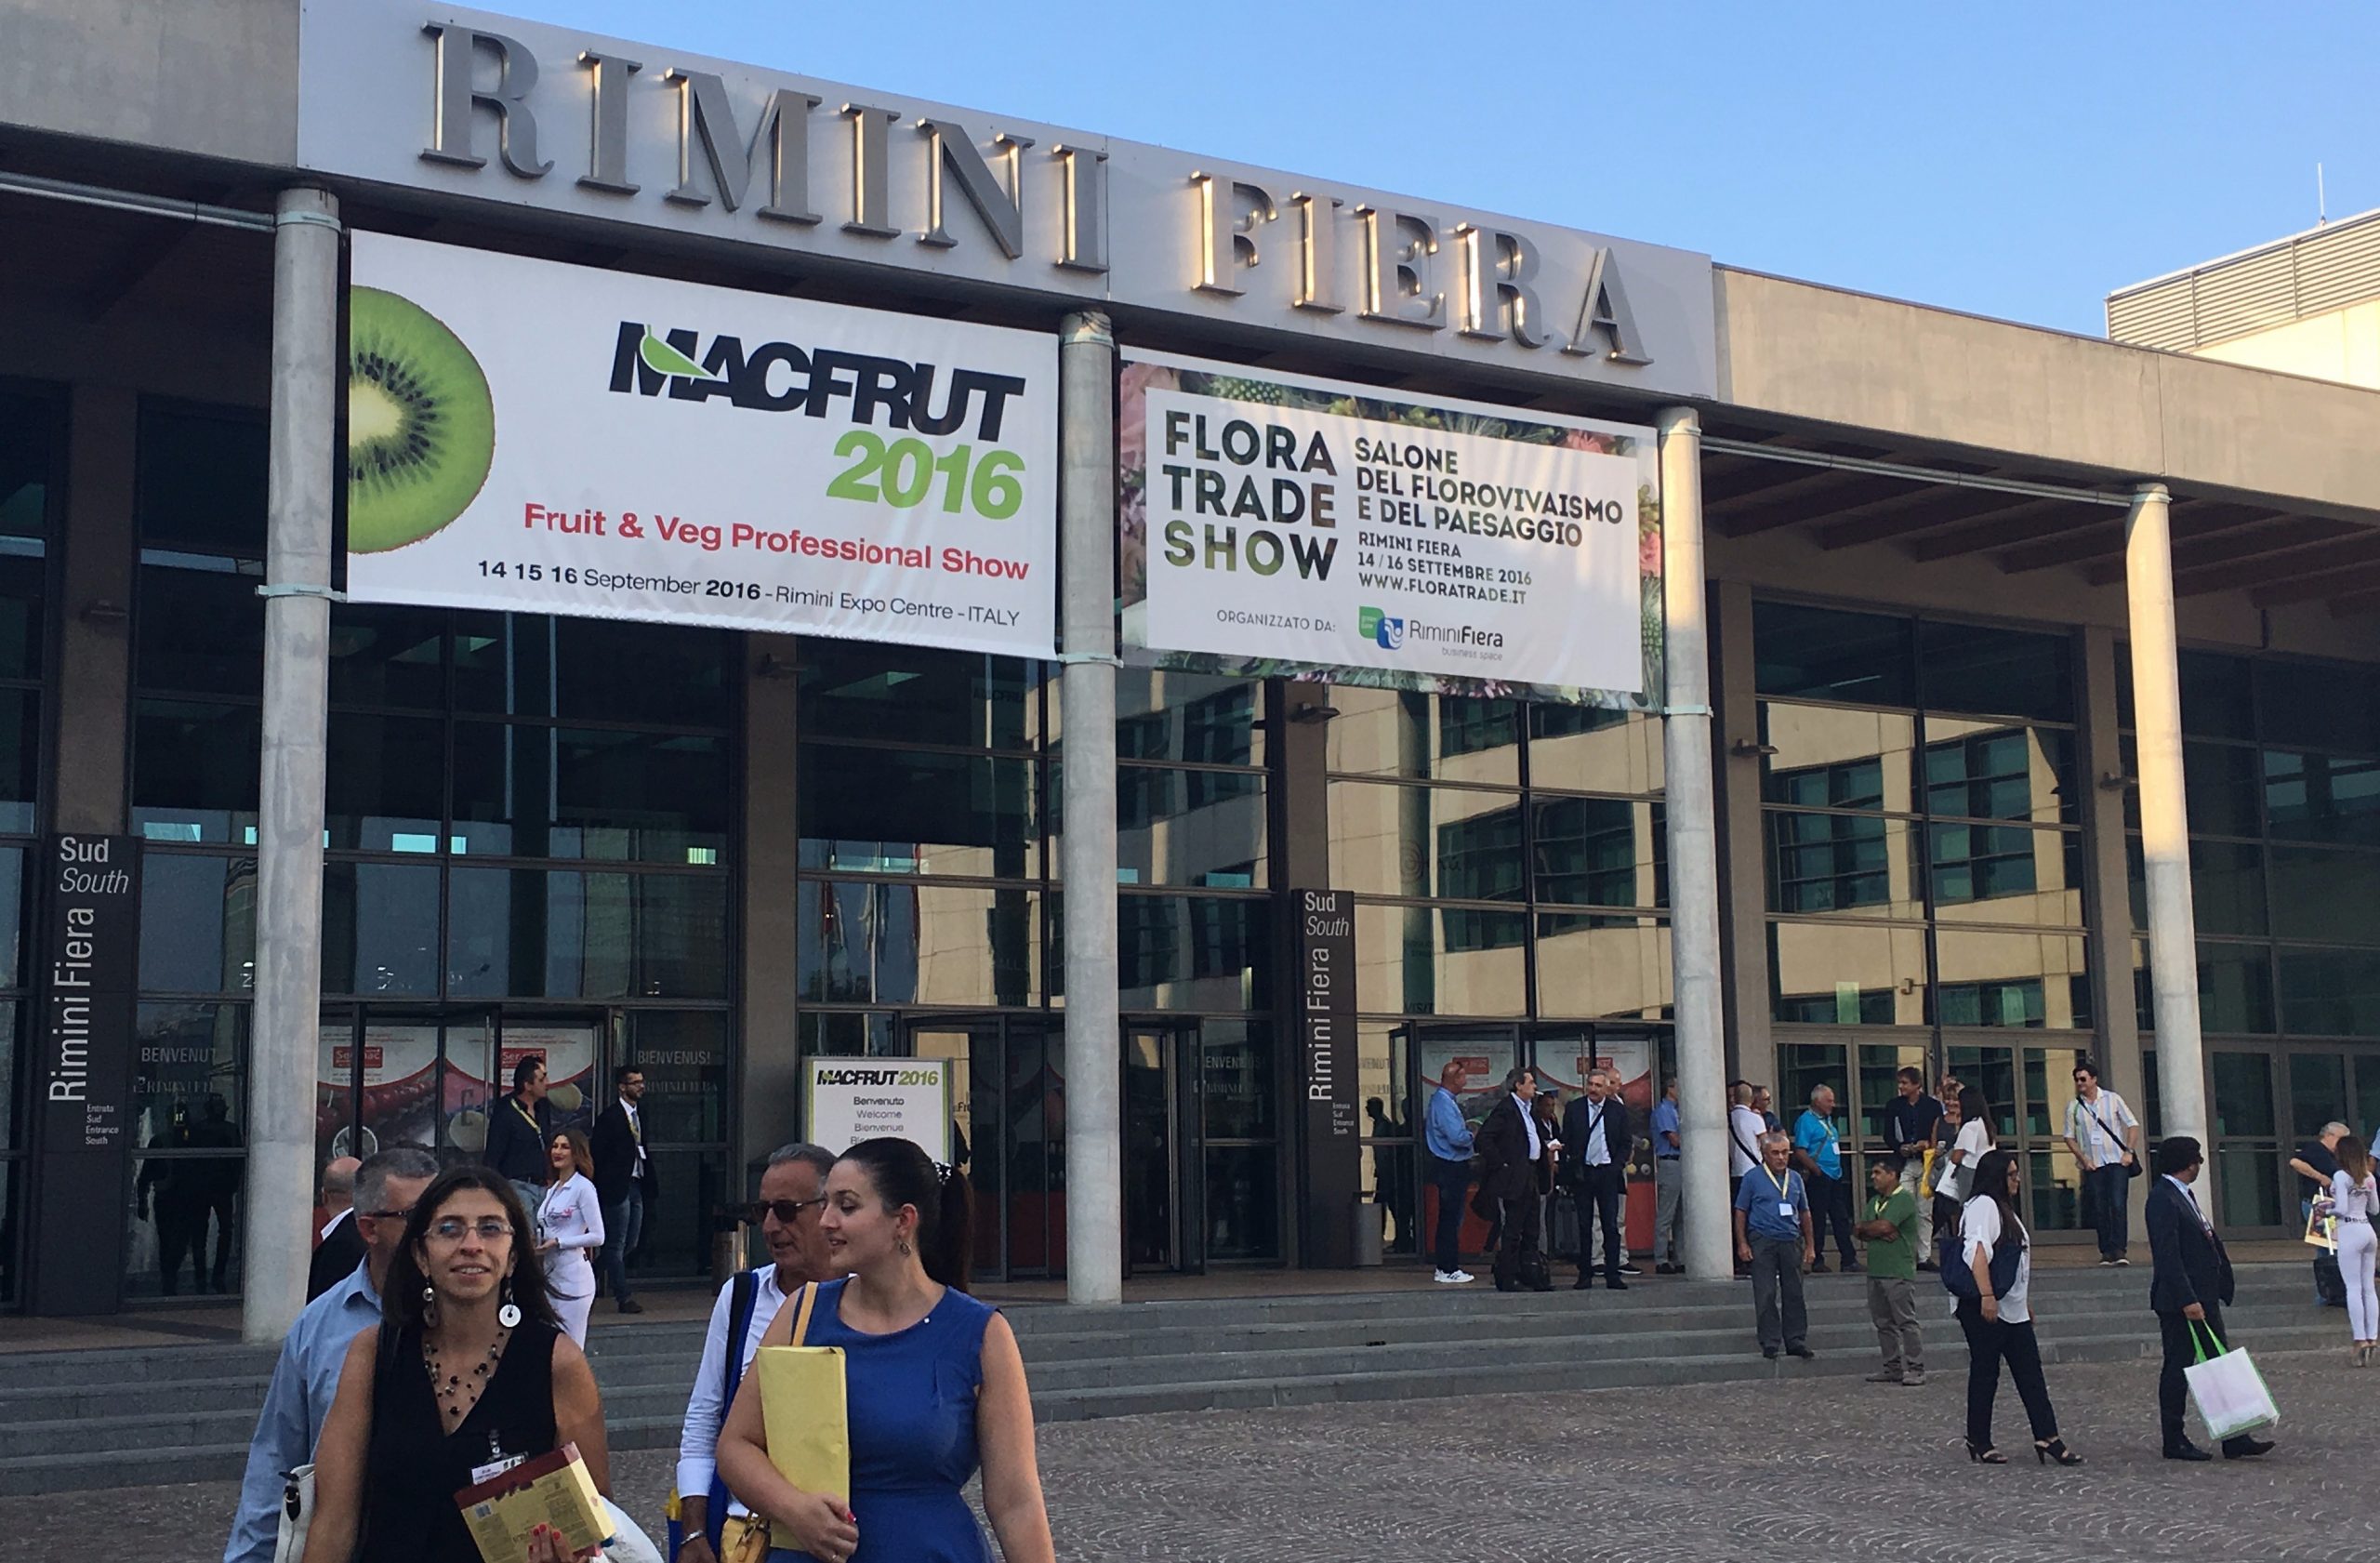 The 2016 edition of Macfrut ended with remarkable record numbers, cementing the Italian show as an international produce showcase. Macfrut organiser Cesena Fiera is launching a fresh programme for 2017.